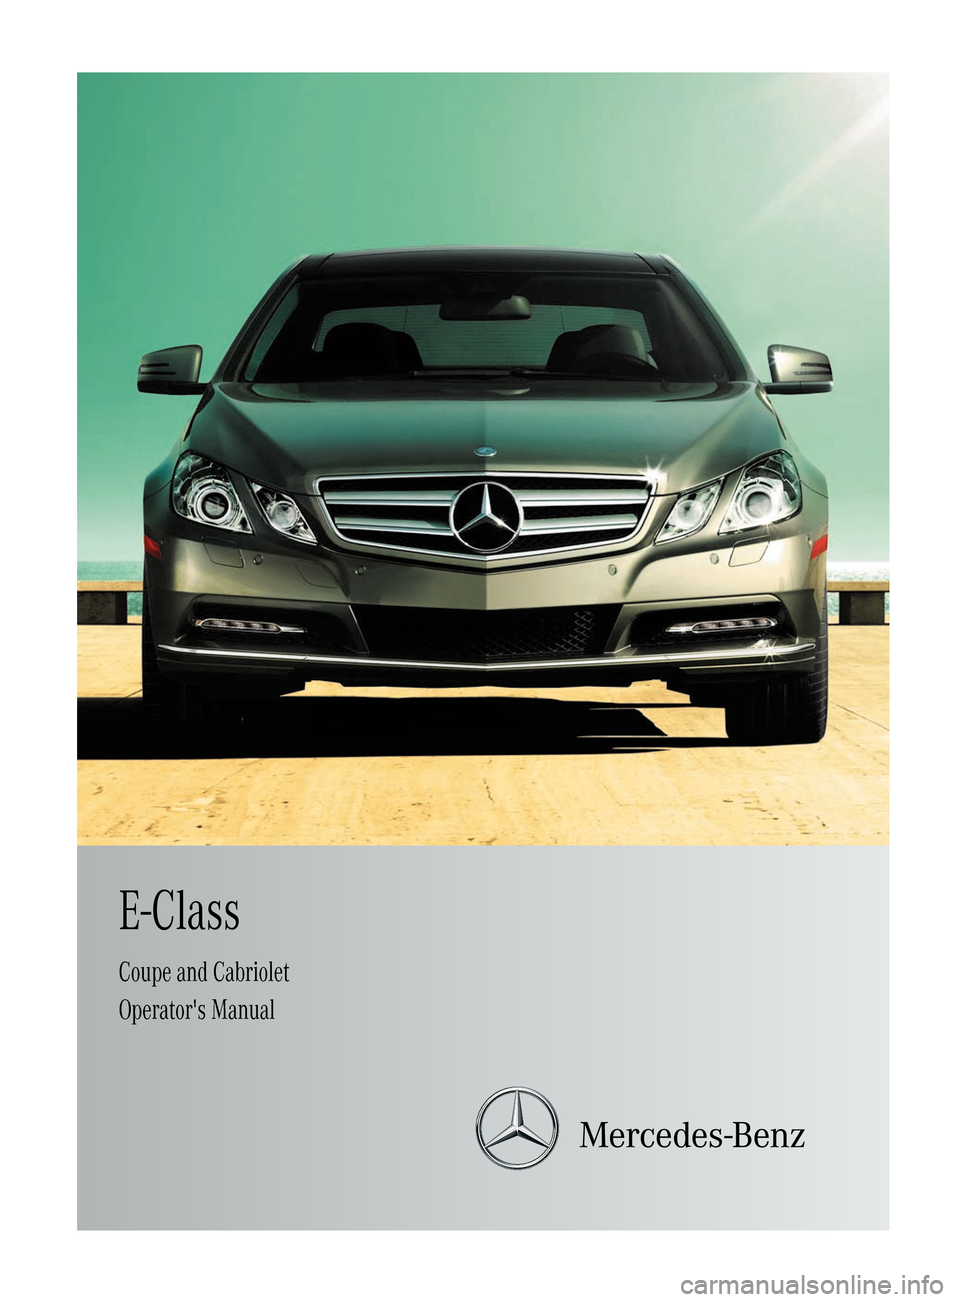 MERCEDES-BENZ E-Class CABRIOLET 2012 C207 Owners Manual 